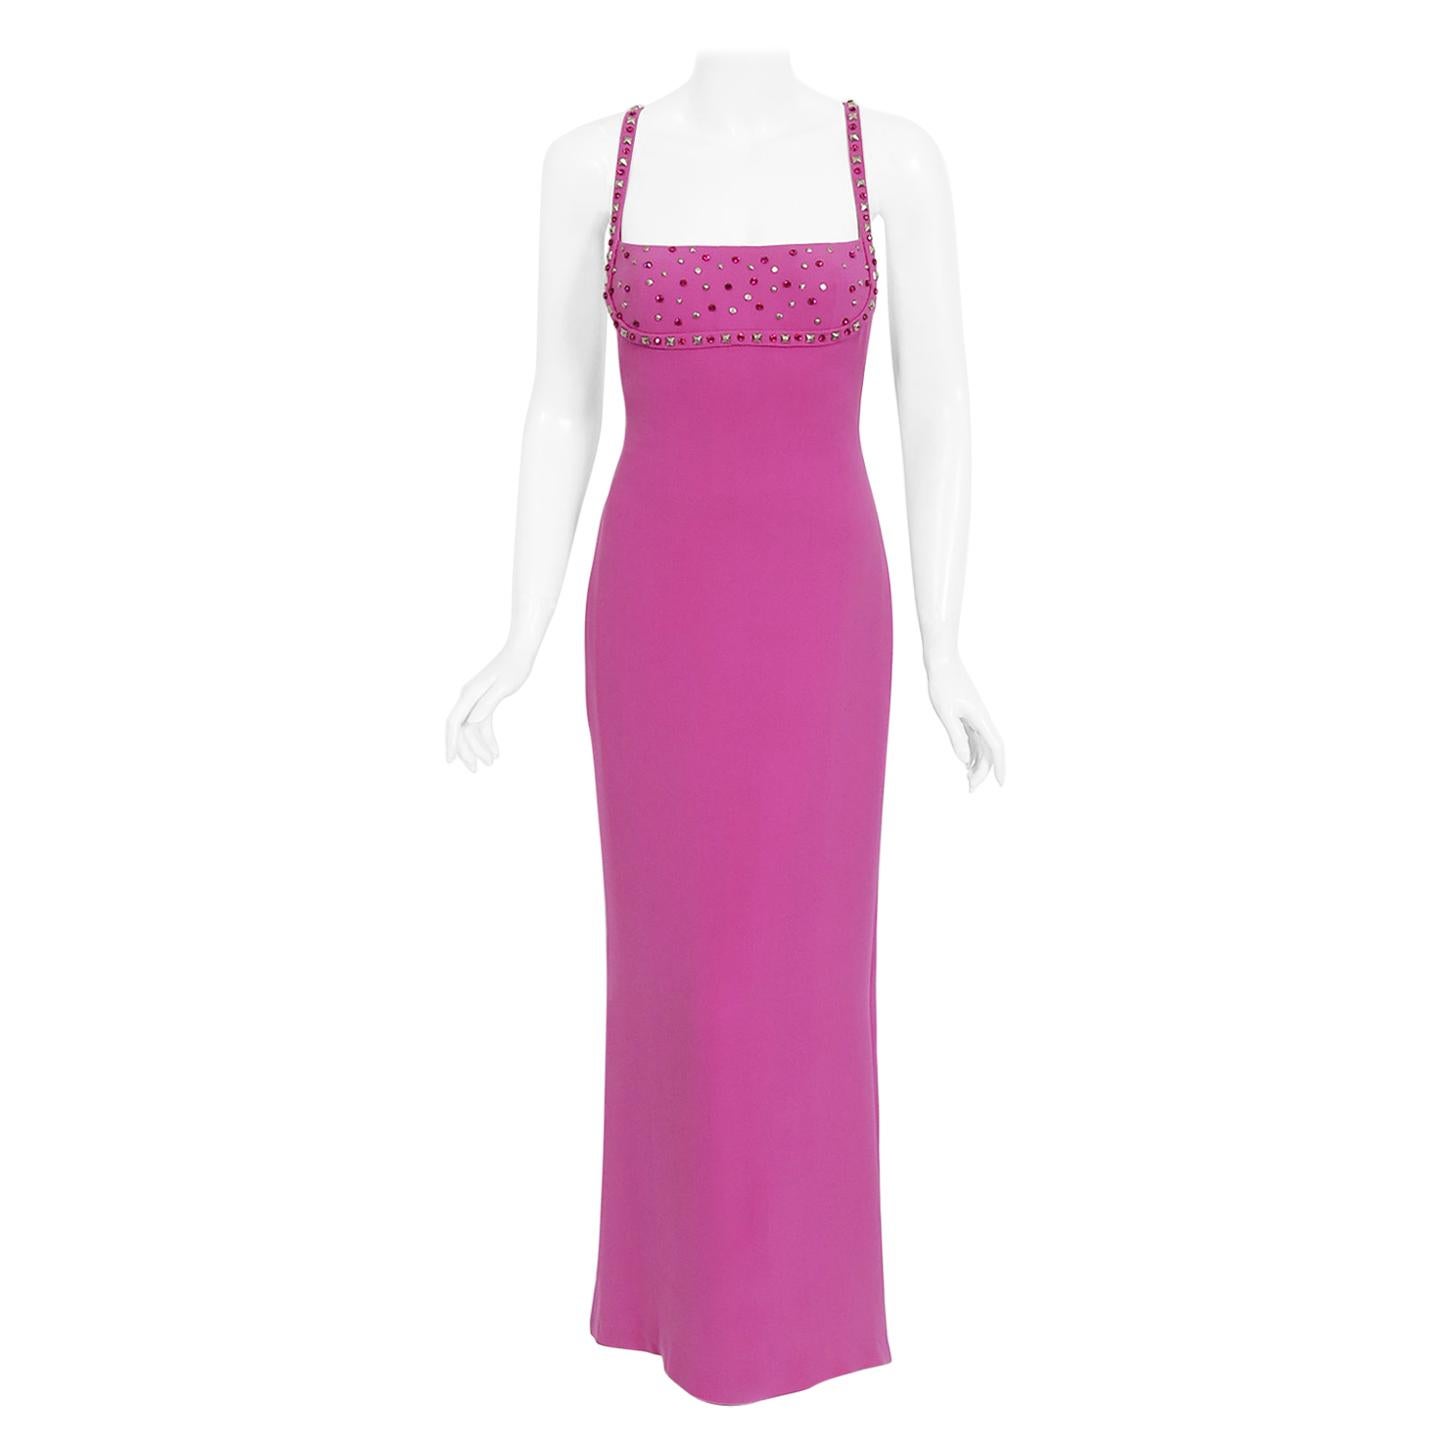 Vintage 1998 Gianni Versace Couture Fuchsia Silk Studded Low-Cut Hourglass Gown